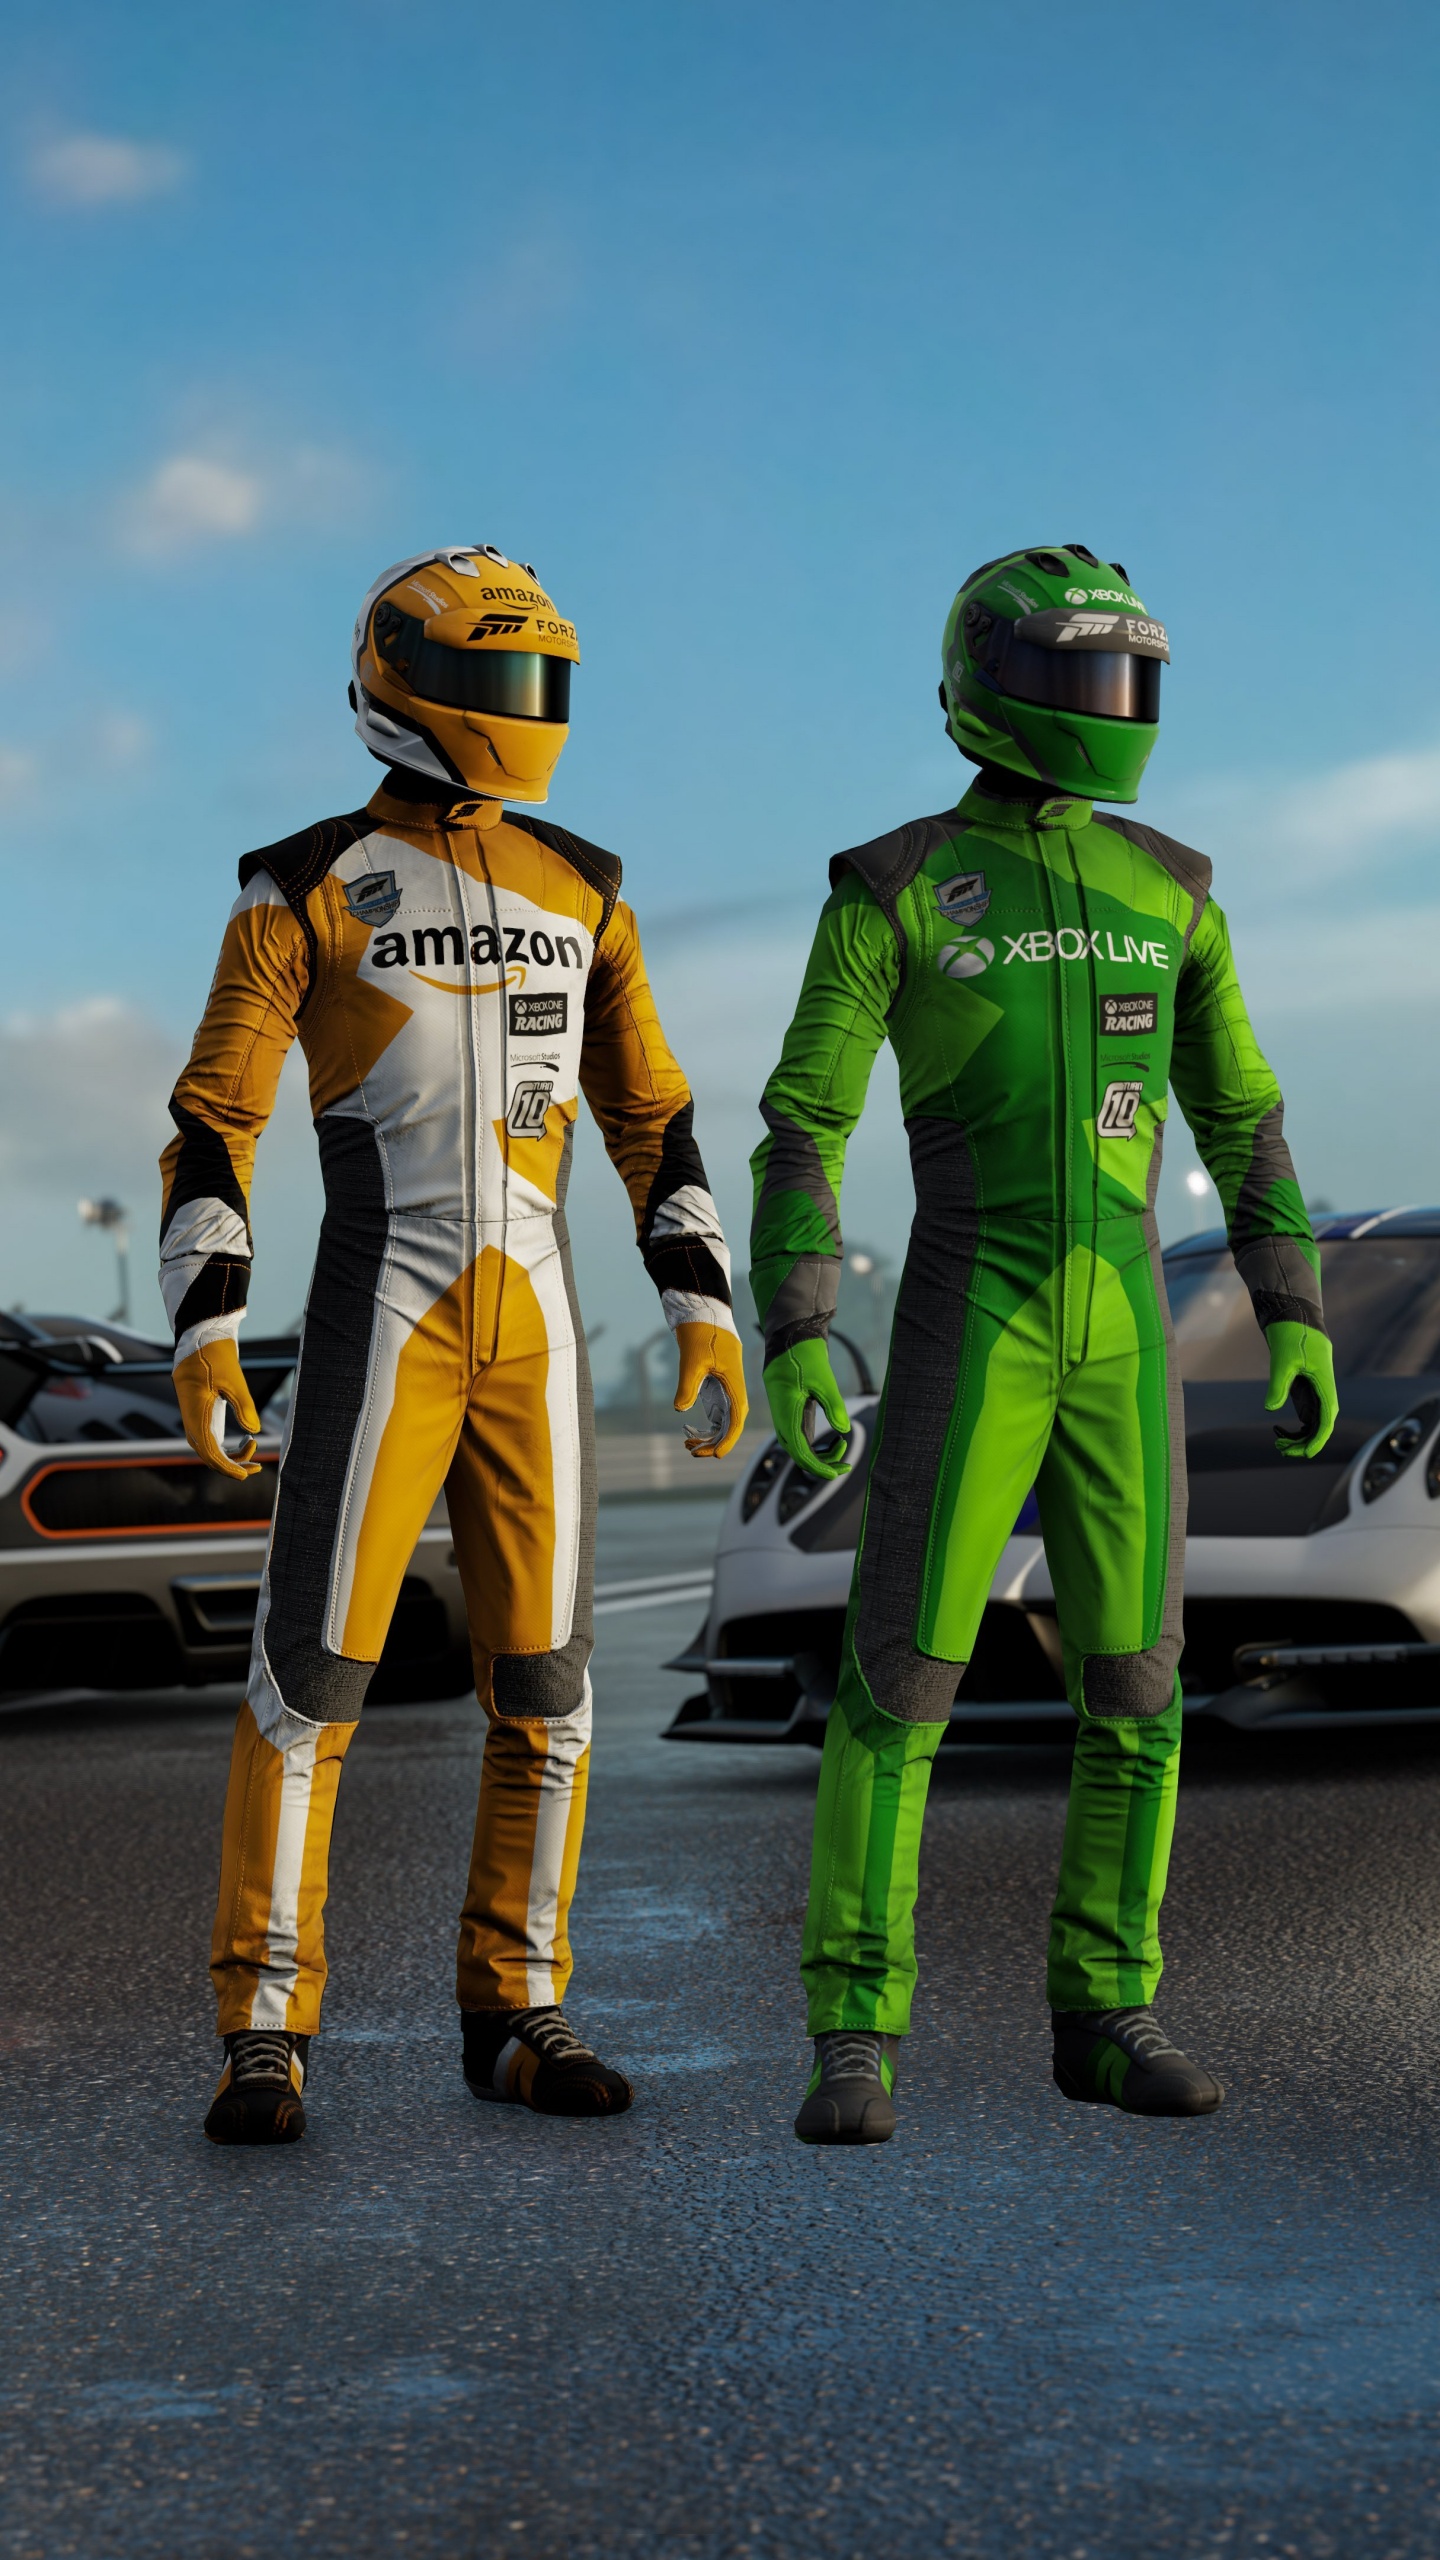 2 Men in Green and Yellow Helmet and Helmet Standing Beside White Sports Car During Daytime. Wallpaper in 1440x2560 Resolution